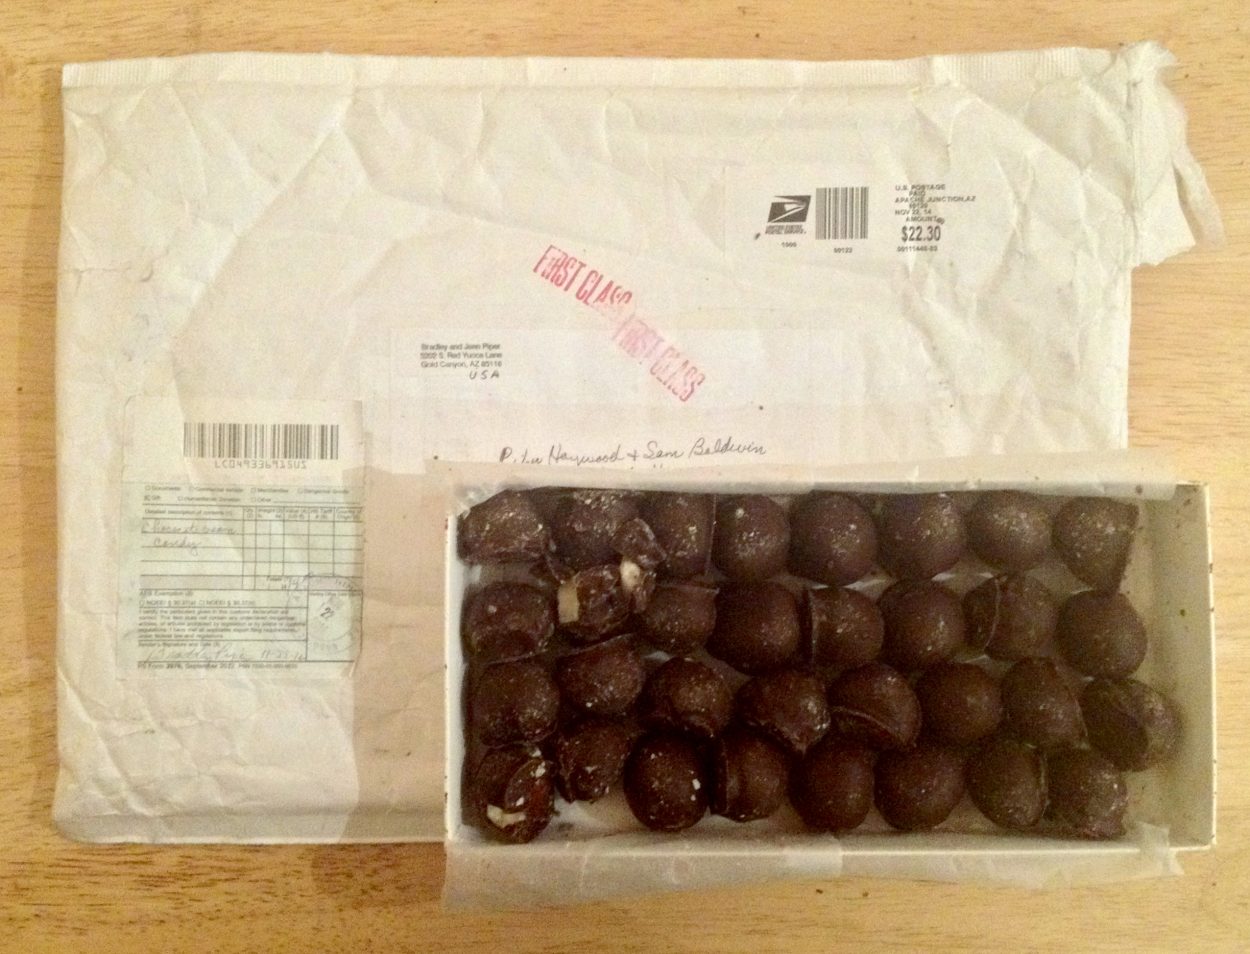 Chocolate candies that have travelled over 5000 miles